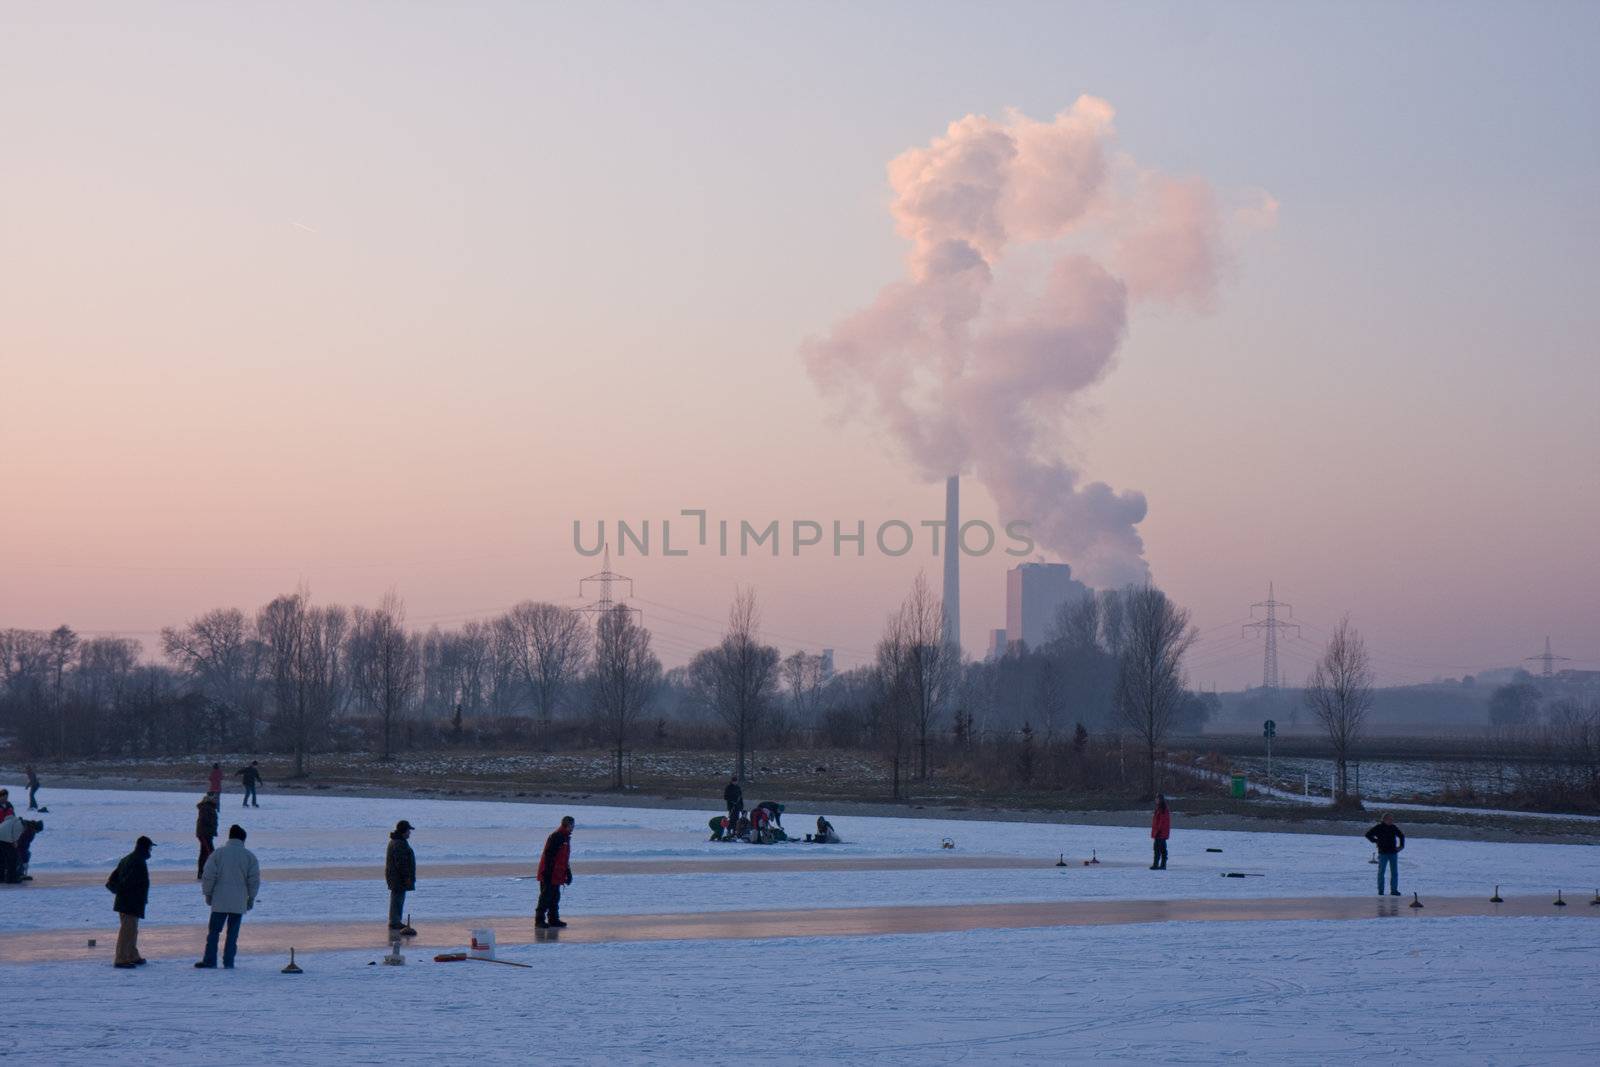 two curling stones on a frozen lake at sunset by bernjuer